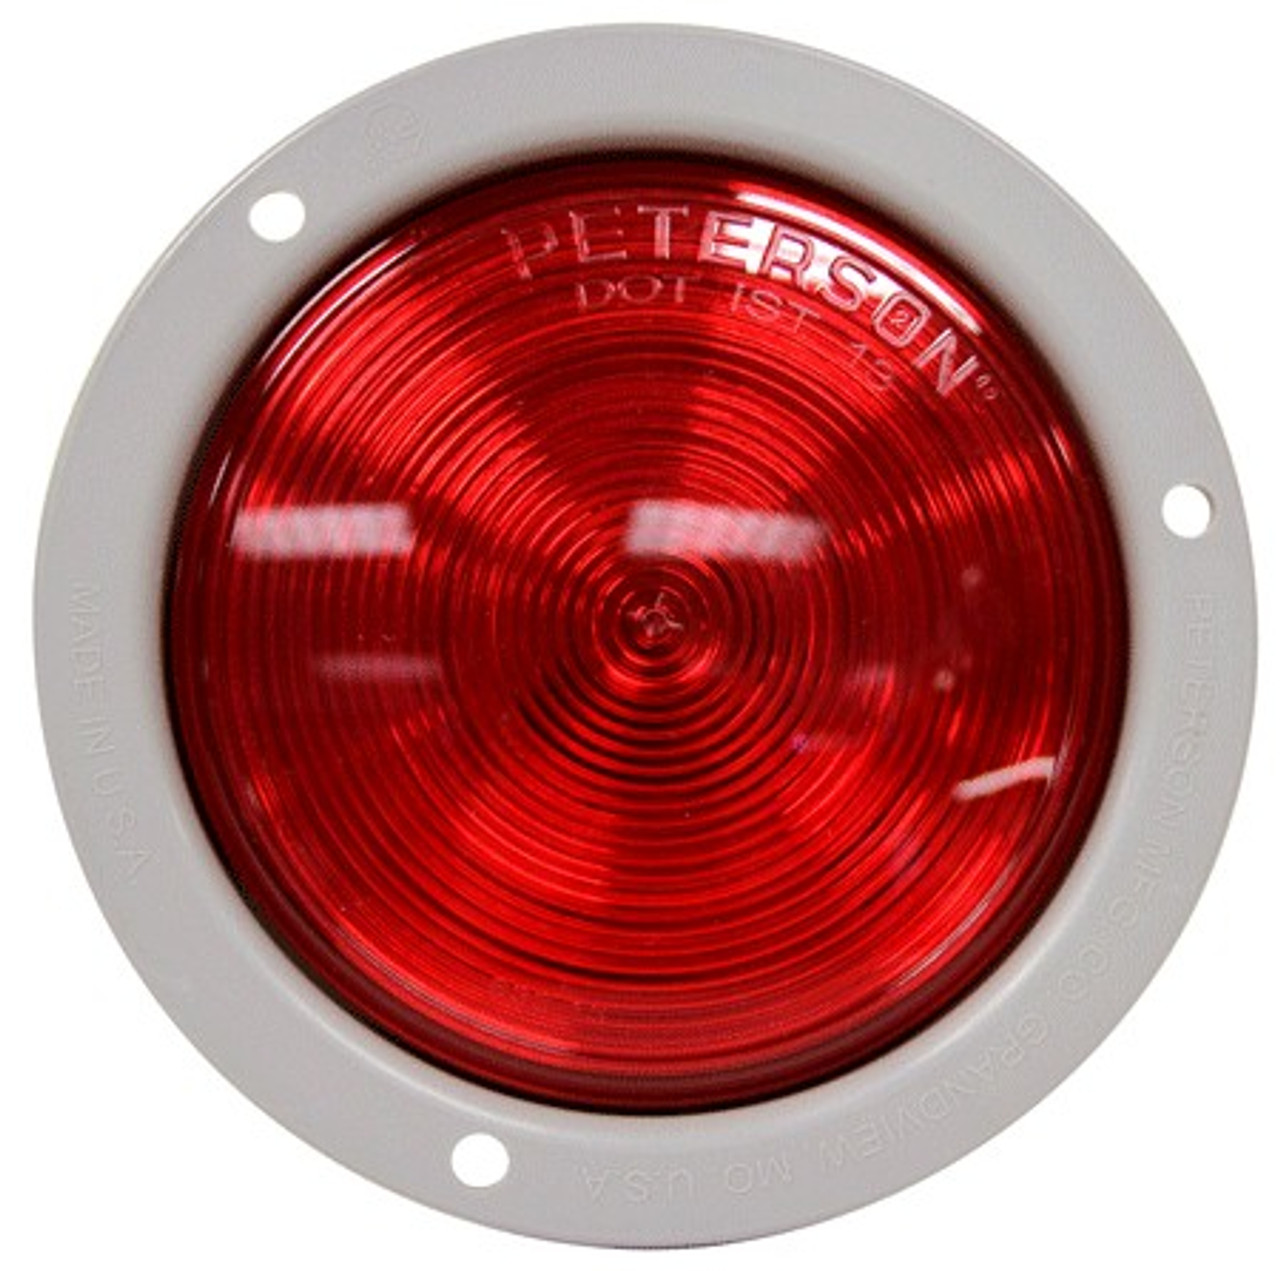 PETERSON / Flange Mount 4″ Round LED Stop, Turn & Tail Lights /  M824R